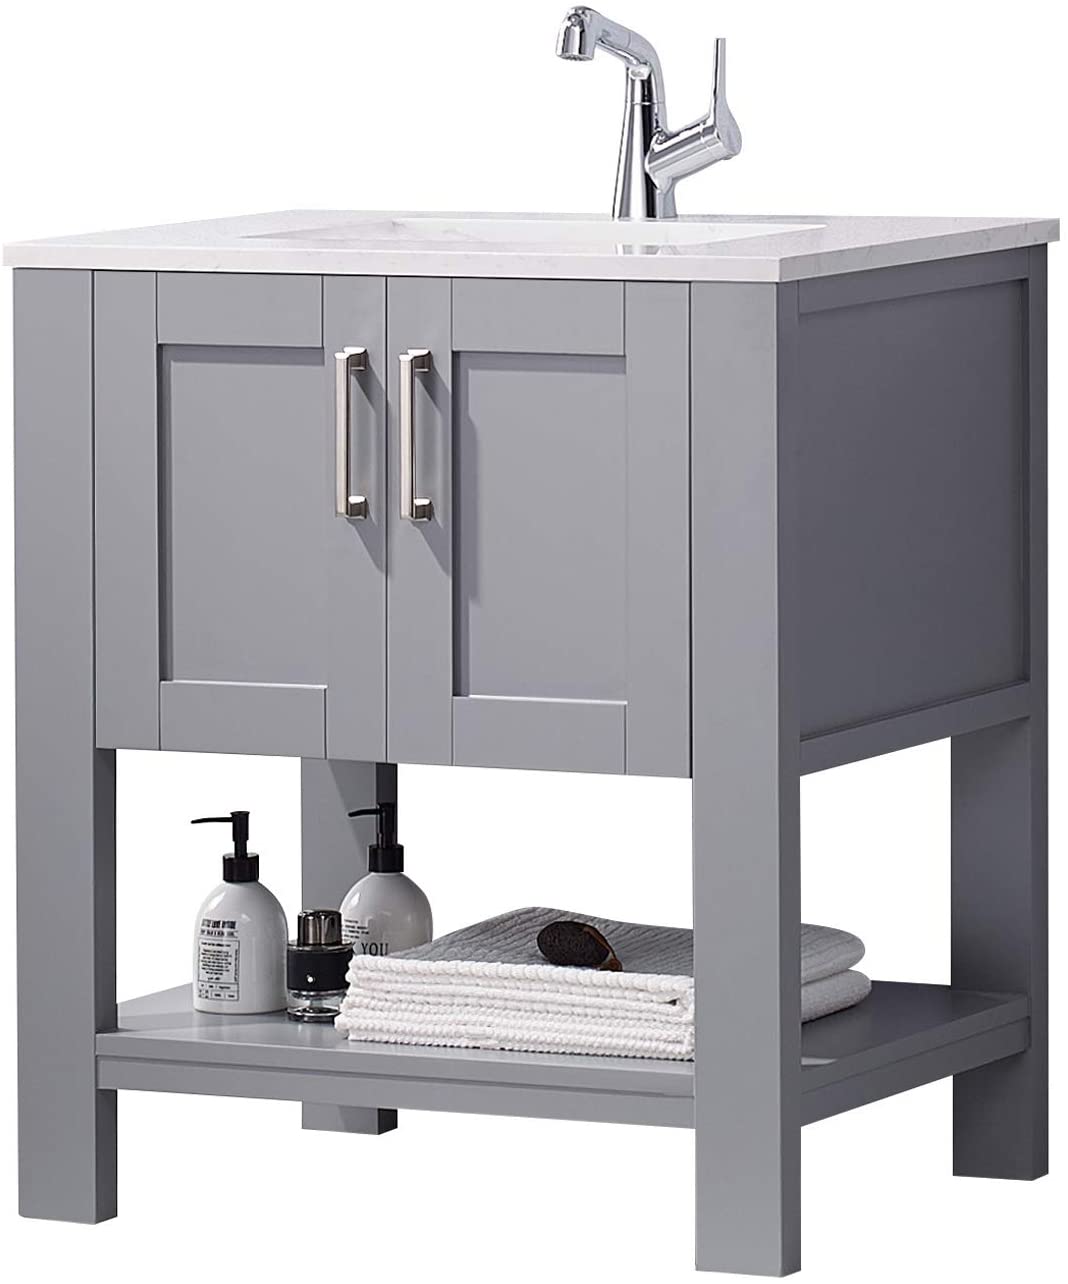 FR Gray Bathroom Vanity with Sink 30 Inch Bathroom Vanity Canbinet Modern Bathroom Sink Vanity with Marble Countertop and White Ceramic Sink-Boyel Living